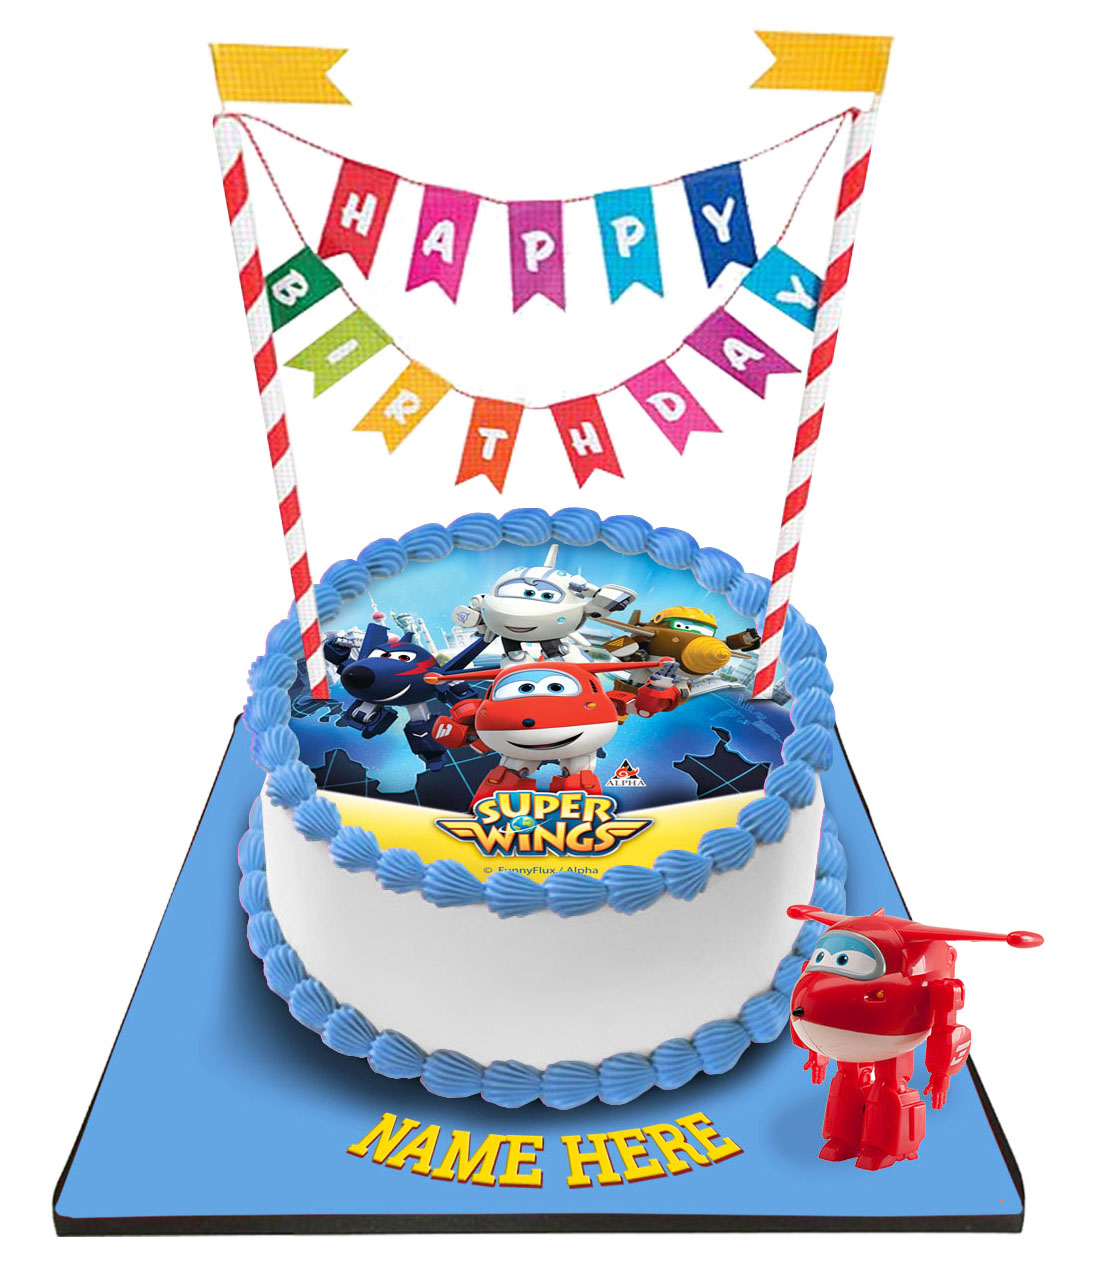 Super Wings Cake with Happy Birthday Bunting & Topper